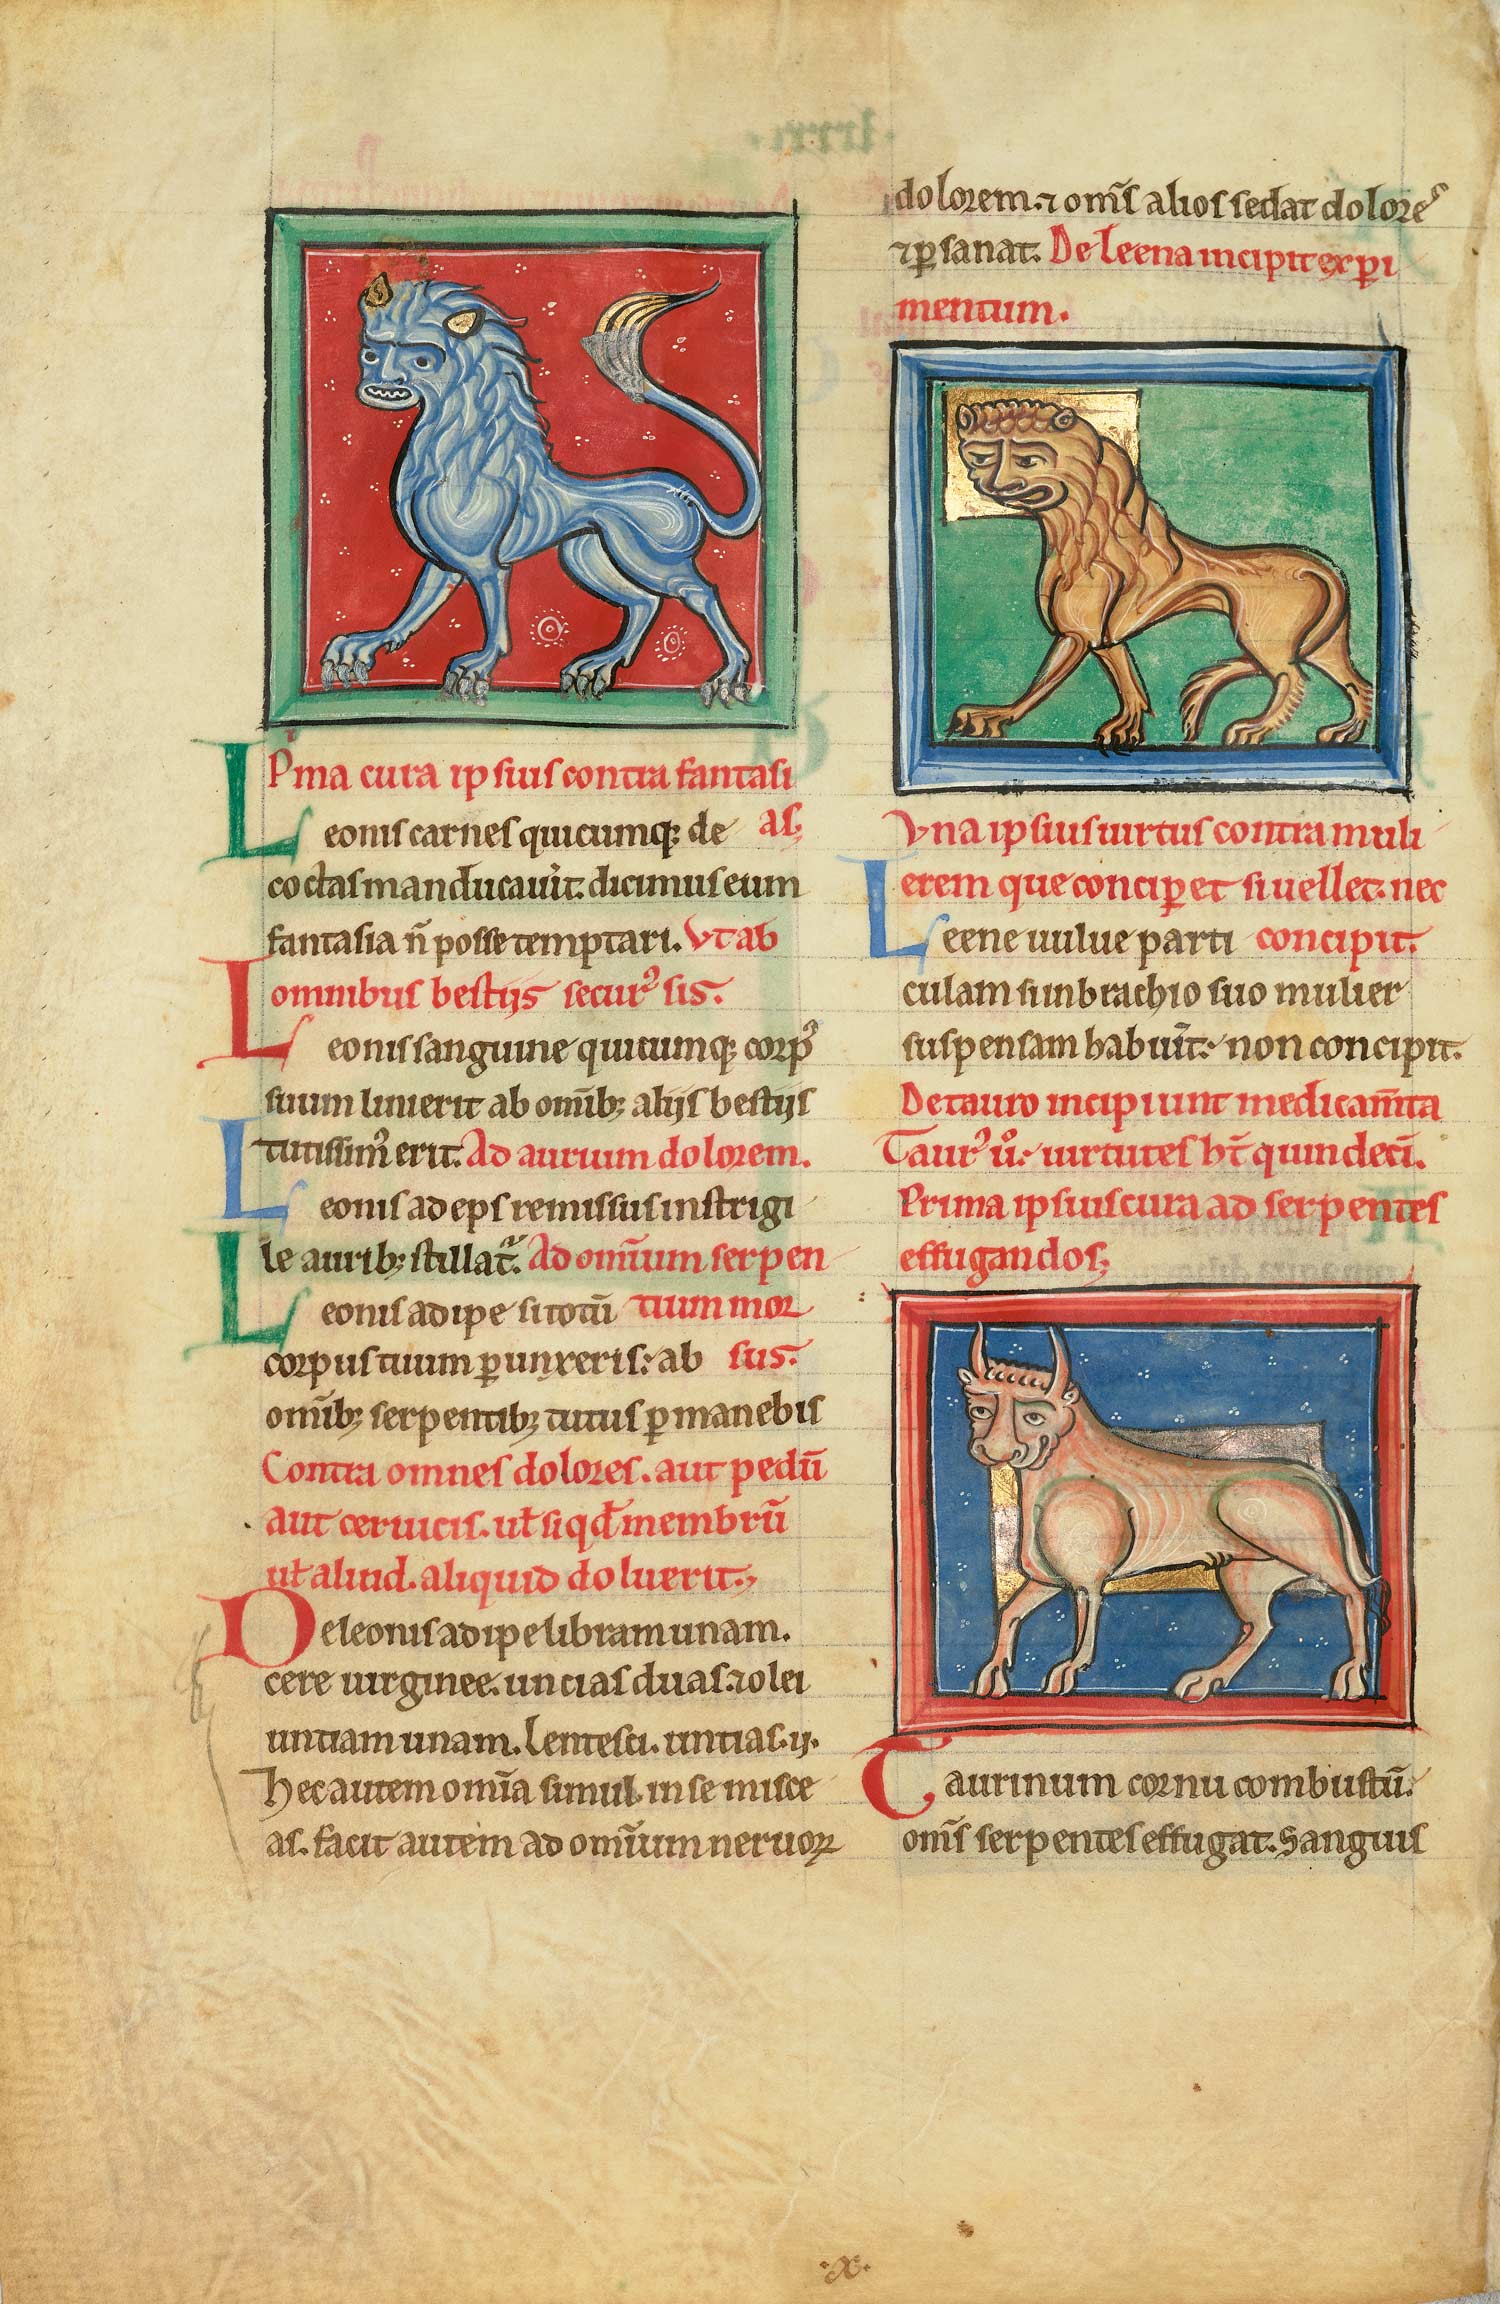 A fine art single page from the facsimile About Plants and Animals. It shows folio 80v with leo - lion; leena [leaena] - lioness; taurus - bull.